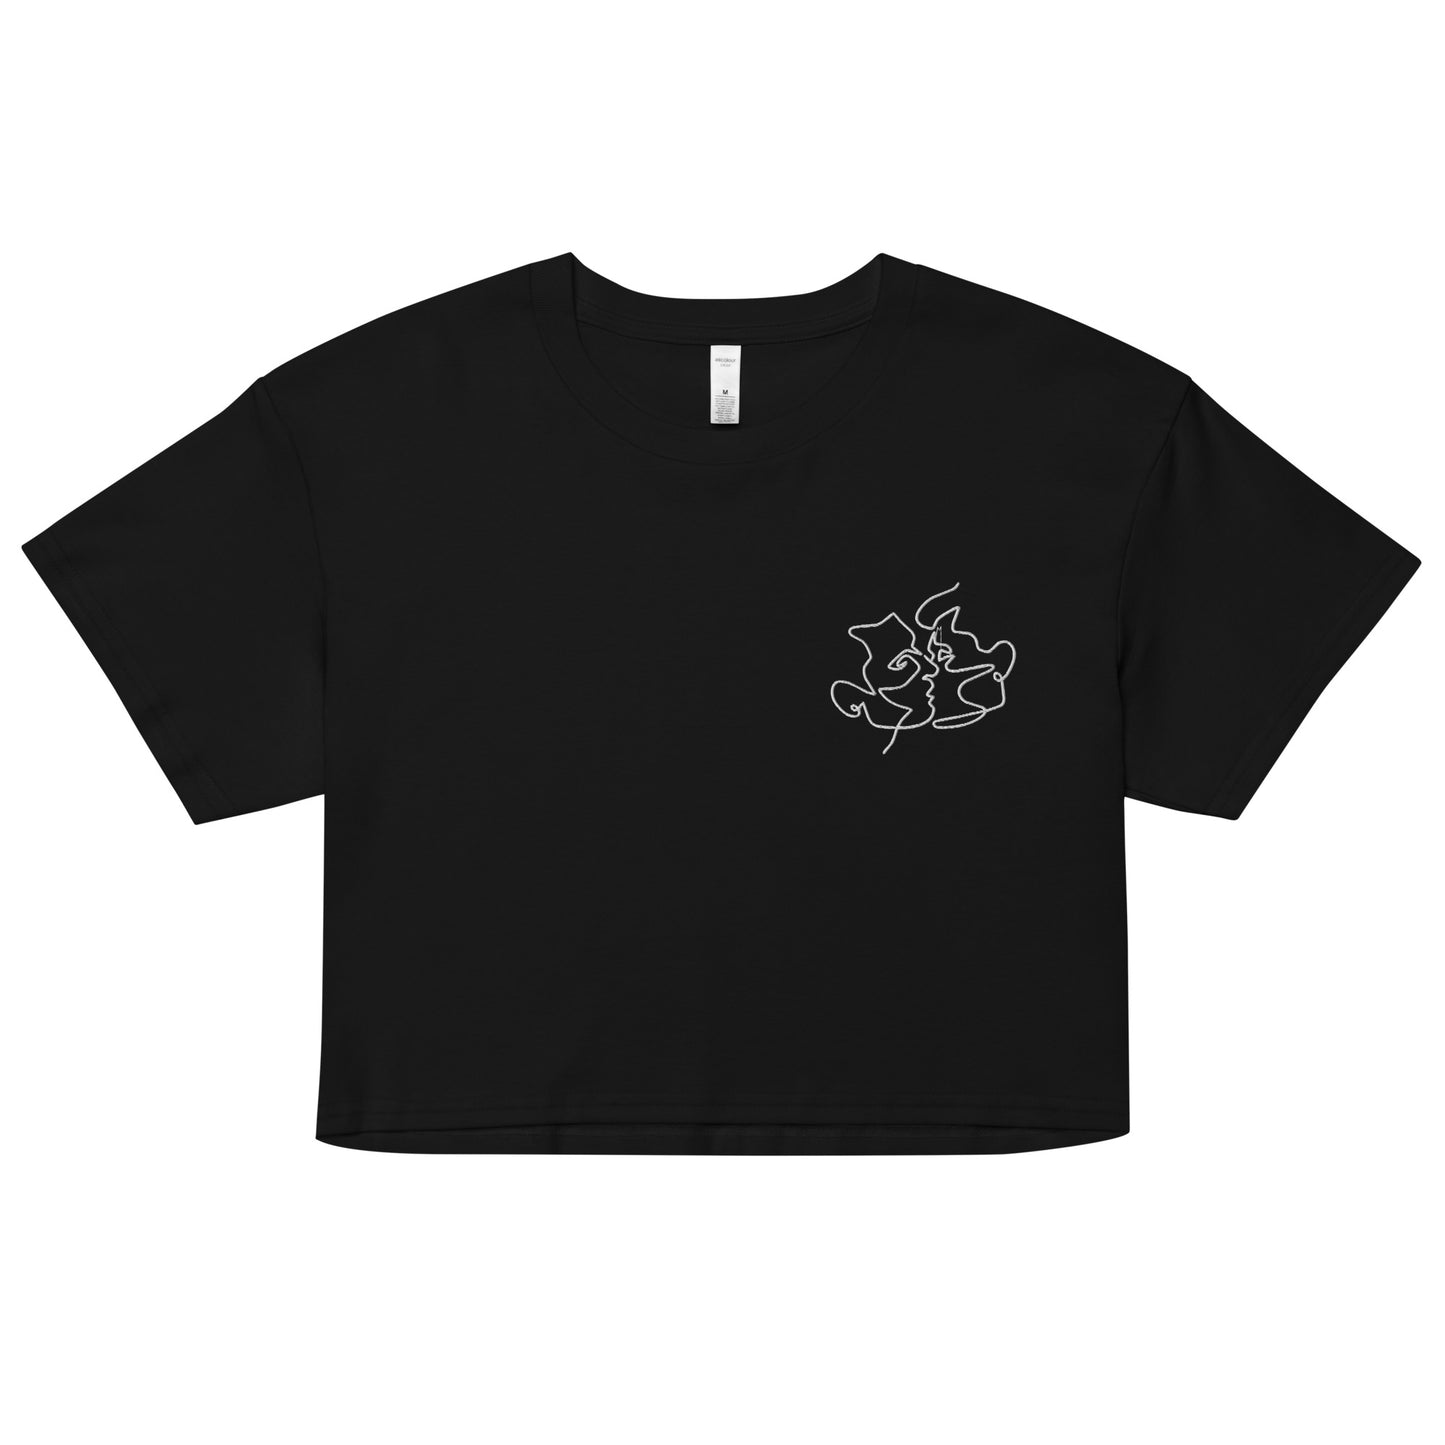 A relaxed, modest black crop top features a subtle white embroidery featuring a minimalistic line art of gay lovers kissing. Adding a touch of love is love to your look—a playful celebration of lgbtq culture! Made from 100% combed cotton. Available in Extra Small, Small, Medium, Large, Extra Large.